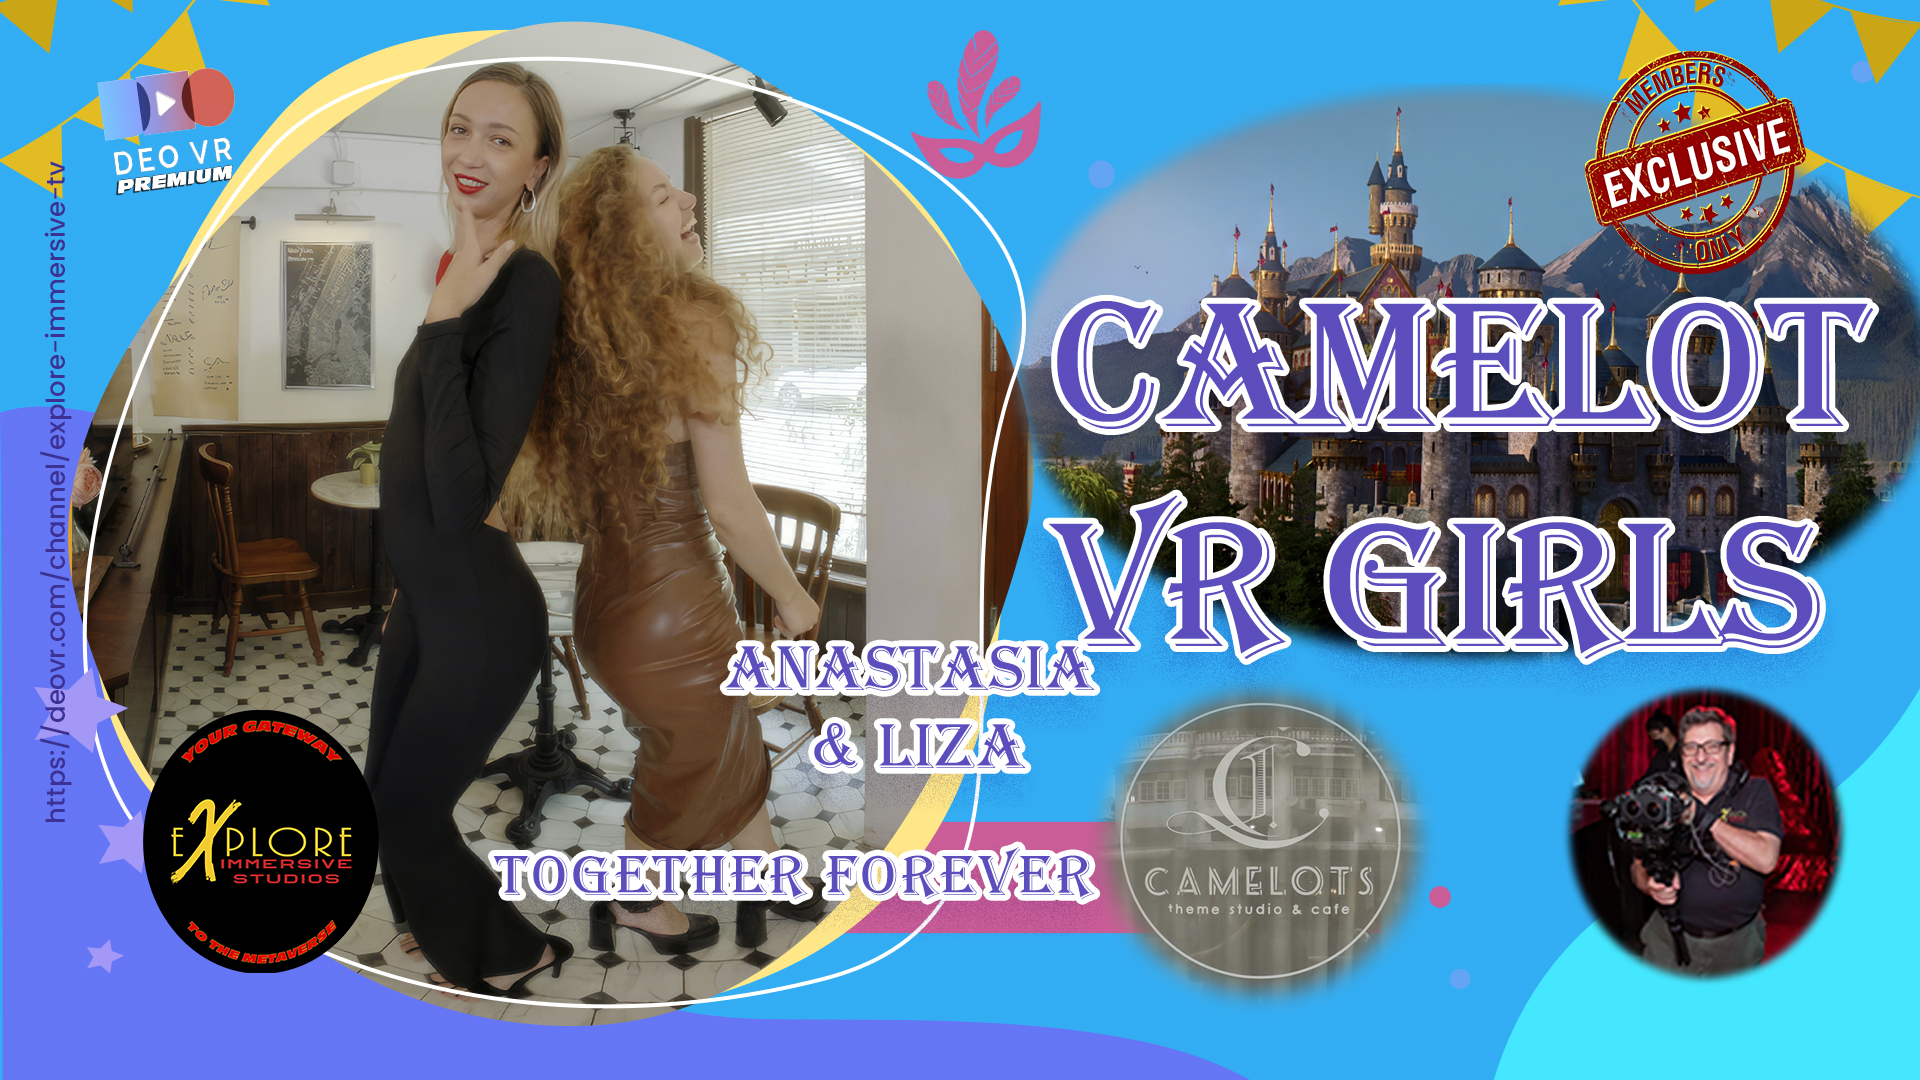 All of Liza and Anastasia VR Camelot Girls - All of Liza and Anastasia VR Camelot Girls. Here is all of their combo videos together. #VR #Sexy #Dance #Music #Girls